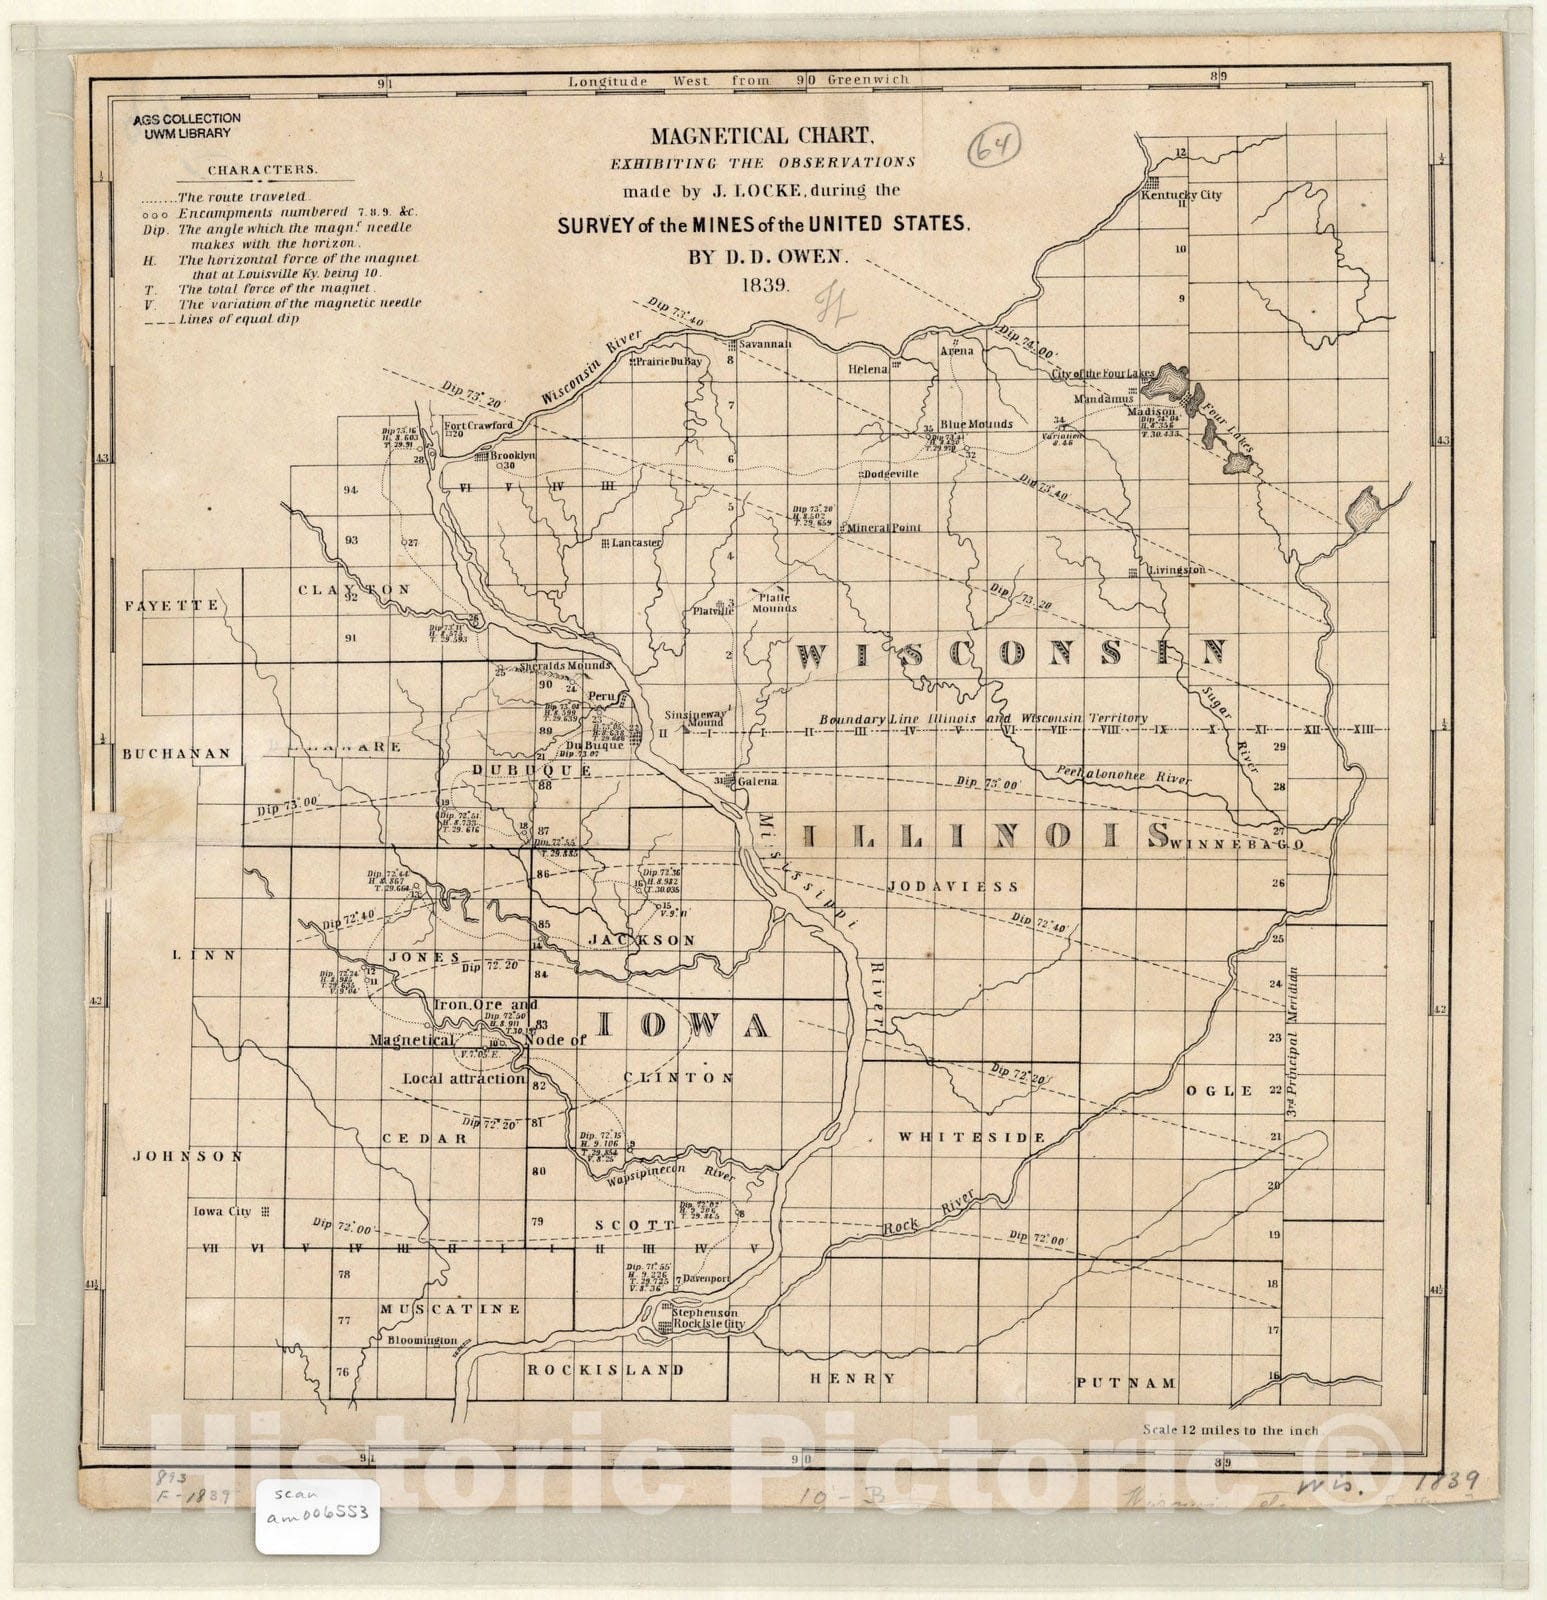 Map : Wisconsin, Illinois, Iowa and Minnesota 1839, Magnetical chart, exhibiting the observations made by J. Locke during the survey of the mines of the United States